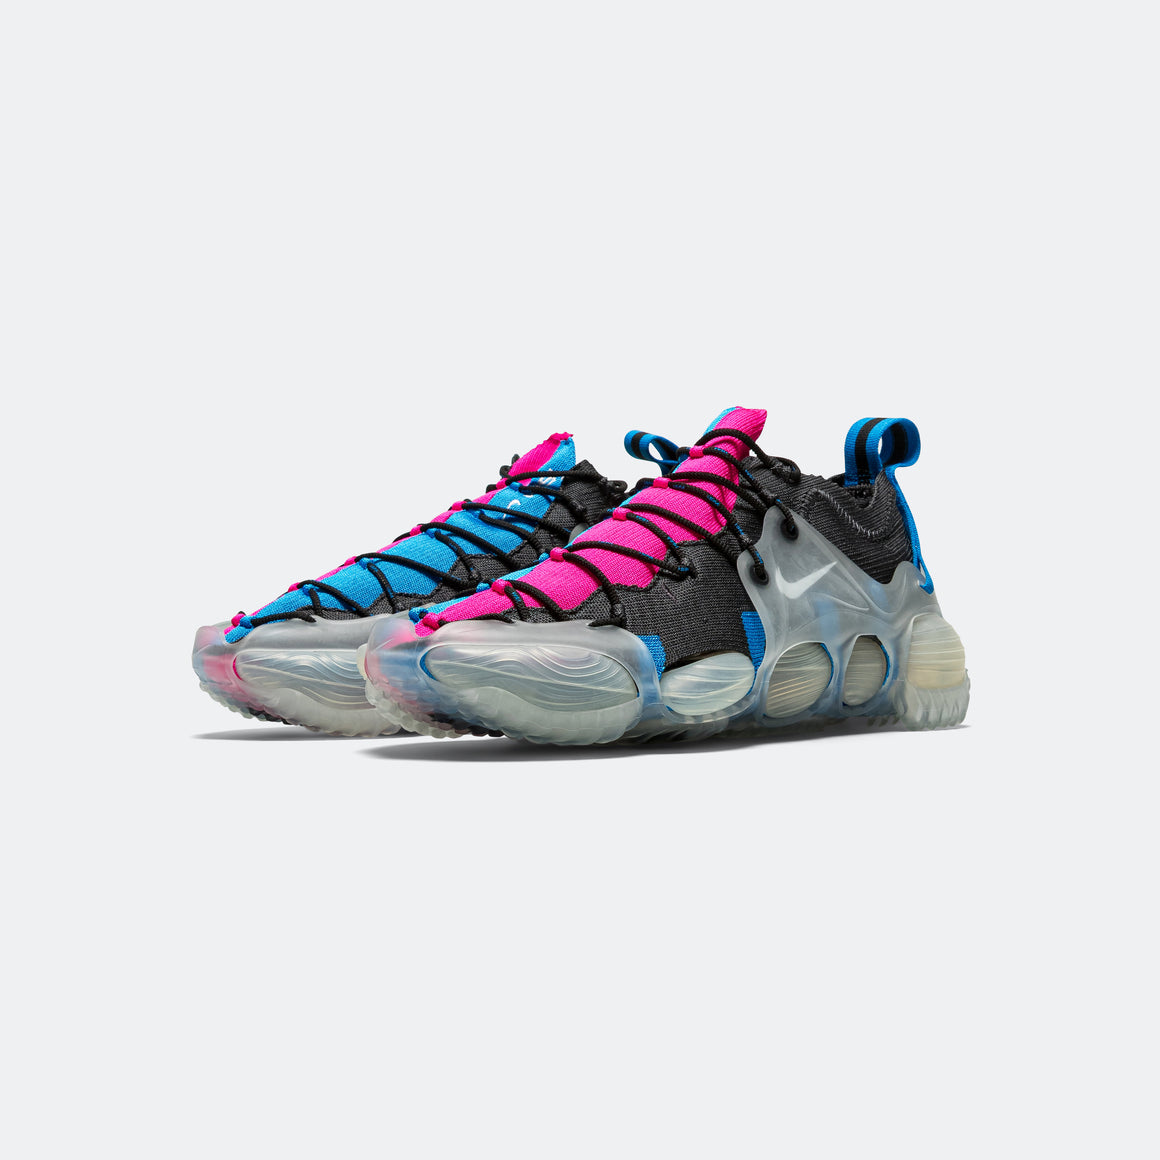 Nike - ISPA Link Axis - Anthracite/Fierce Pink-Photo Blue - UP THERE